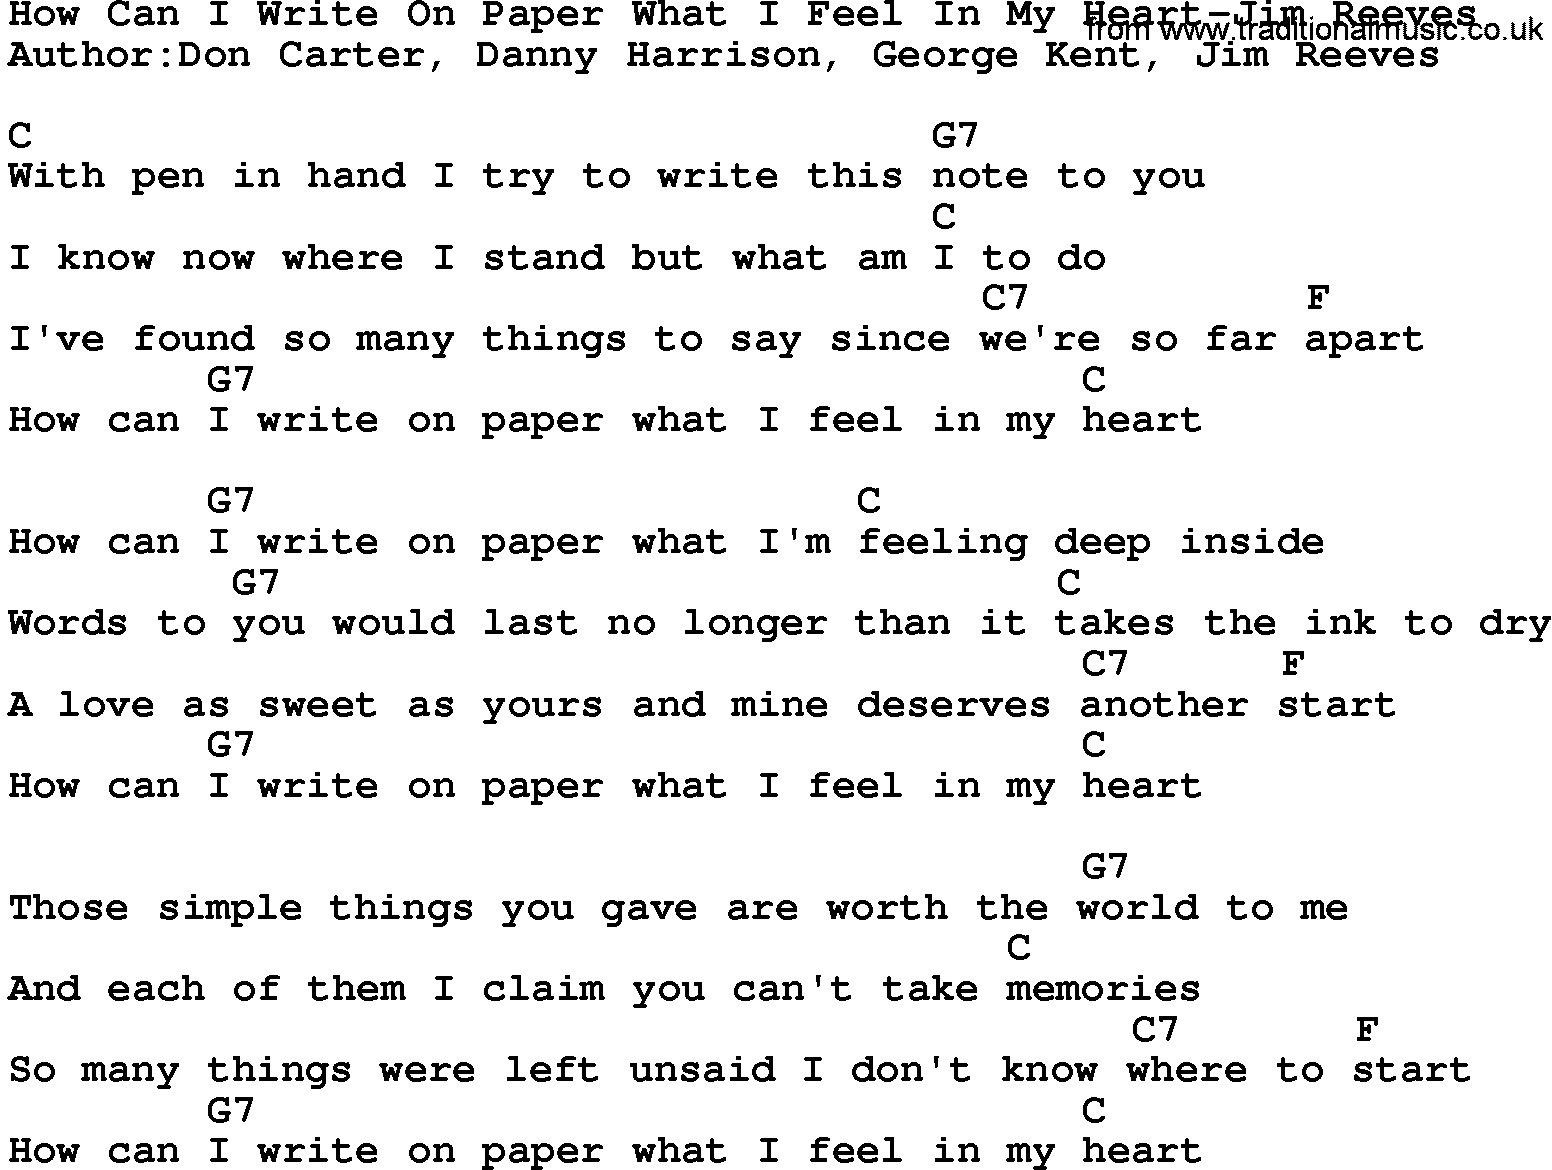 Country music song: How Can I Write On Paper What I Feel In My Heart-Jim Reeves lyrics and chords